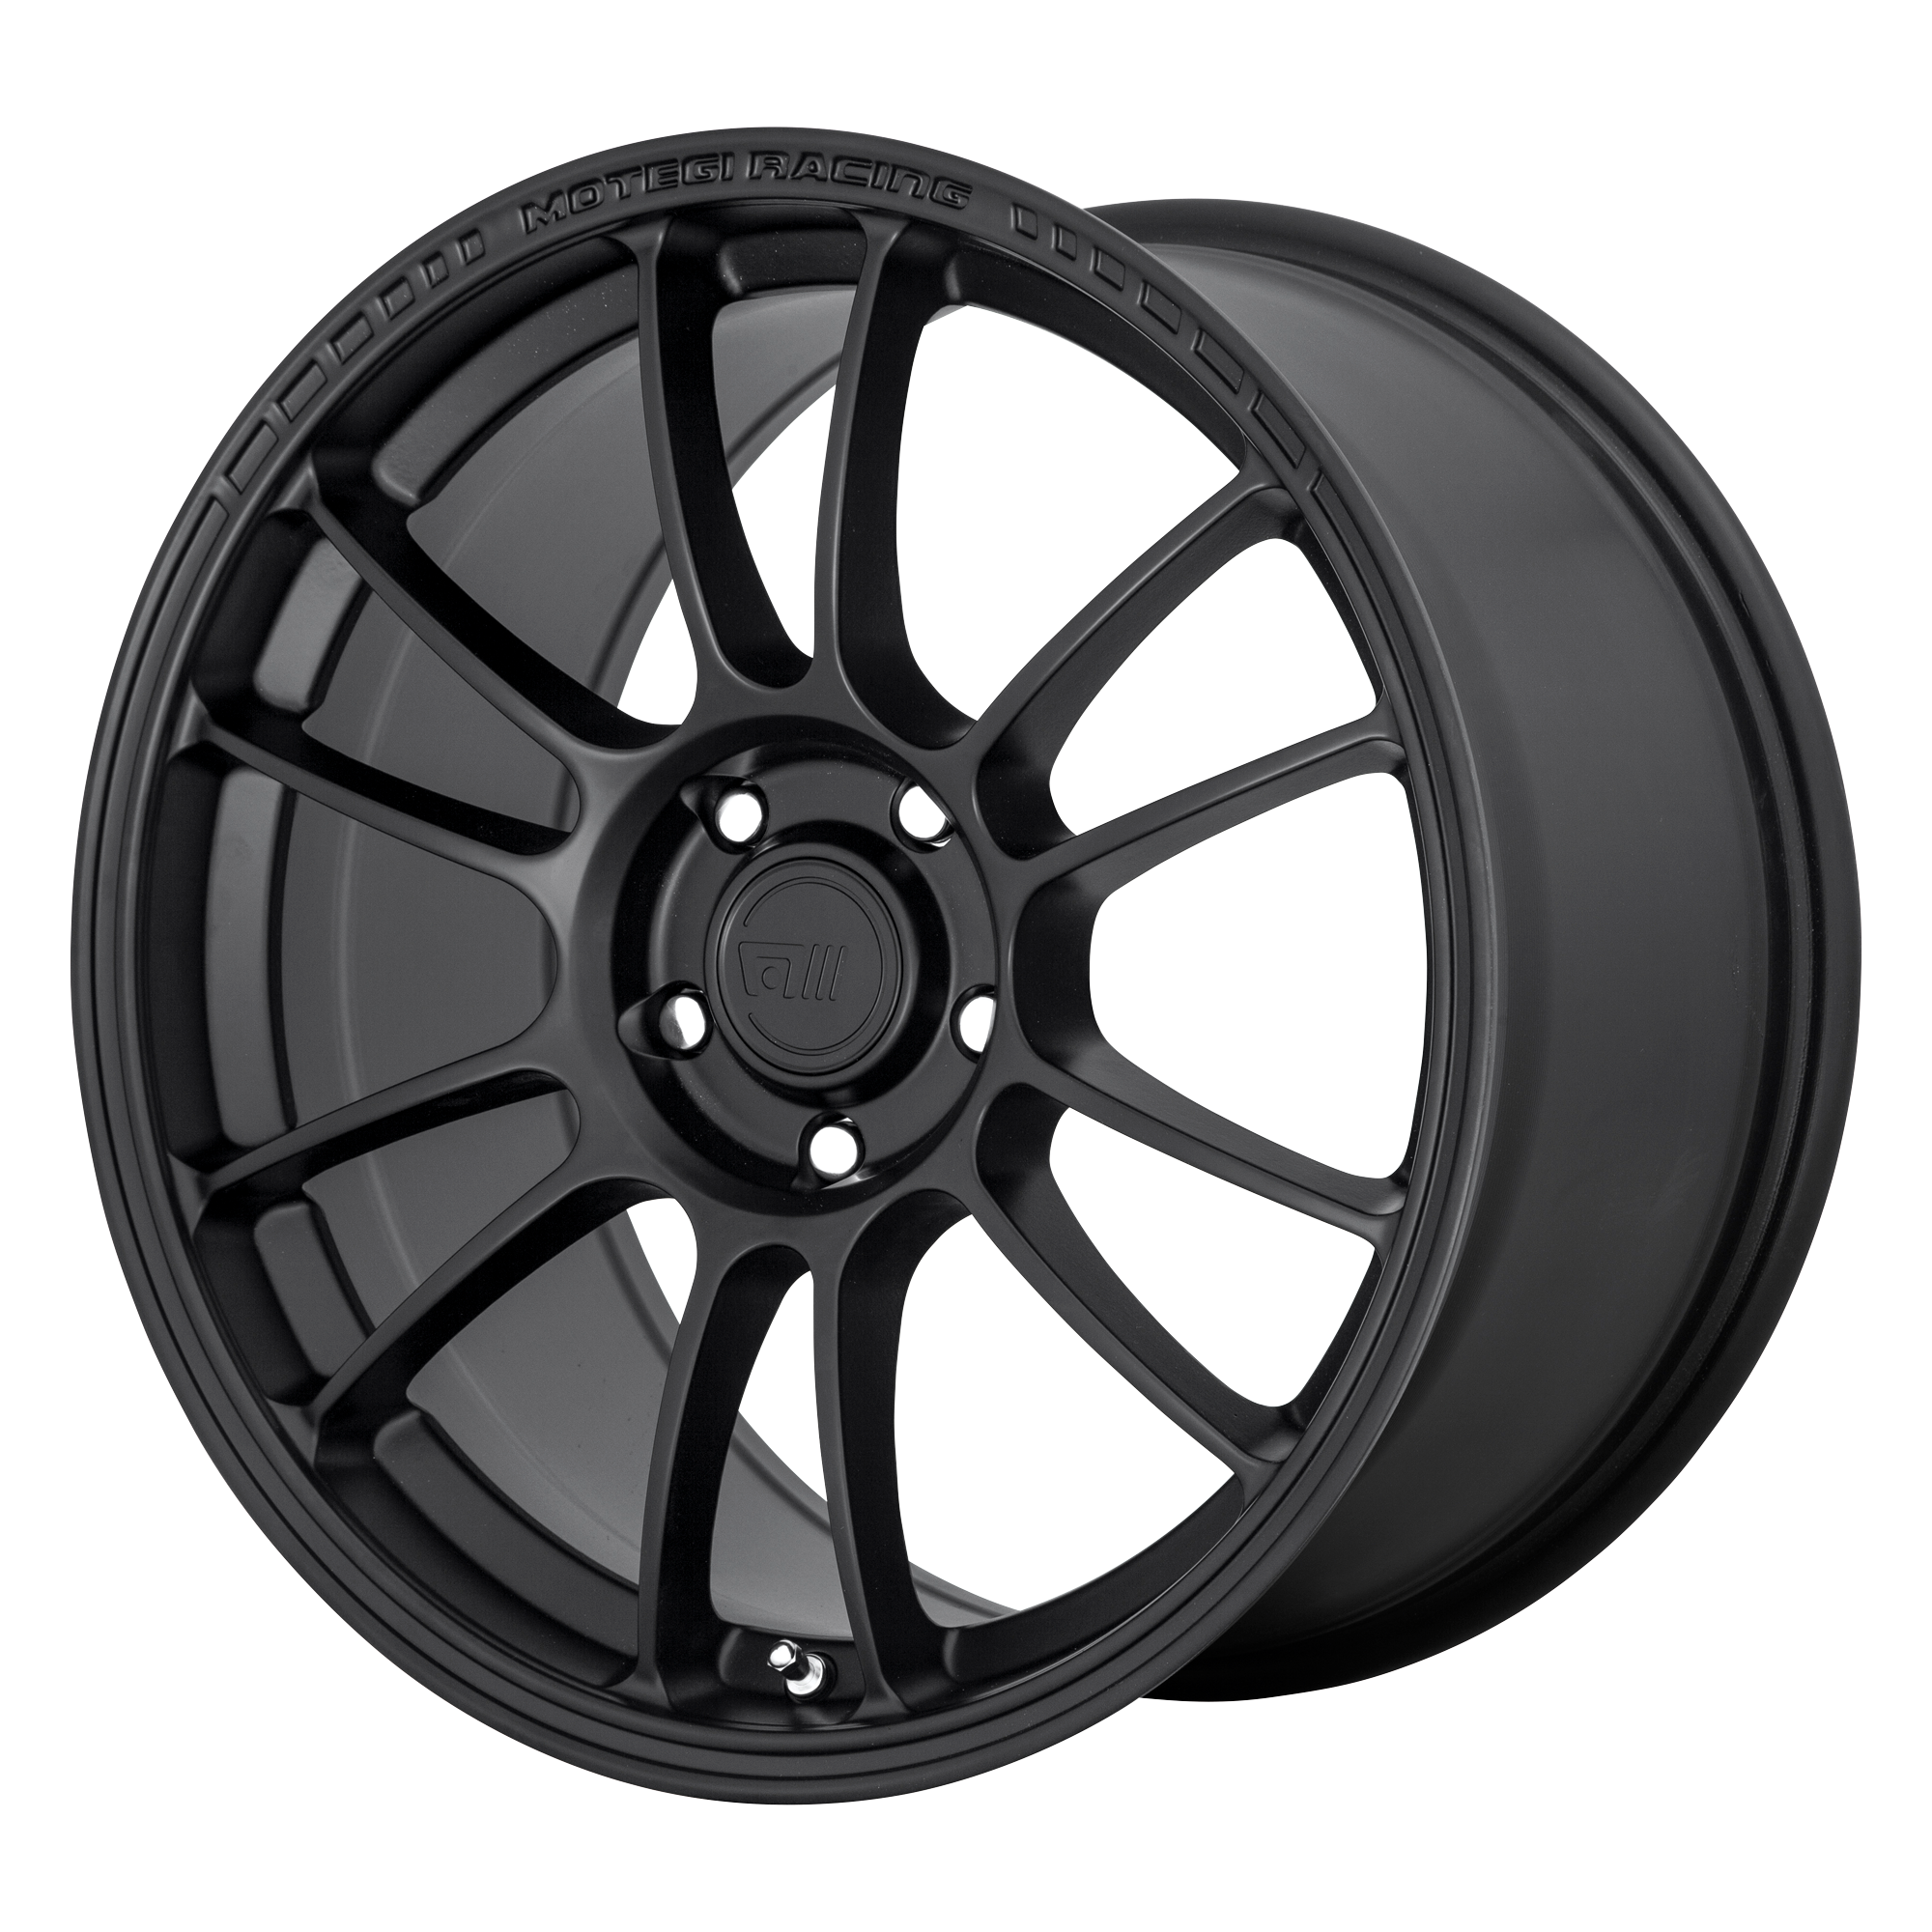 SS6 18x9.5 5x100.00 SATIN BLACK (45 mm) - Tires and Engine Performance